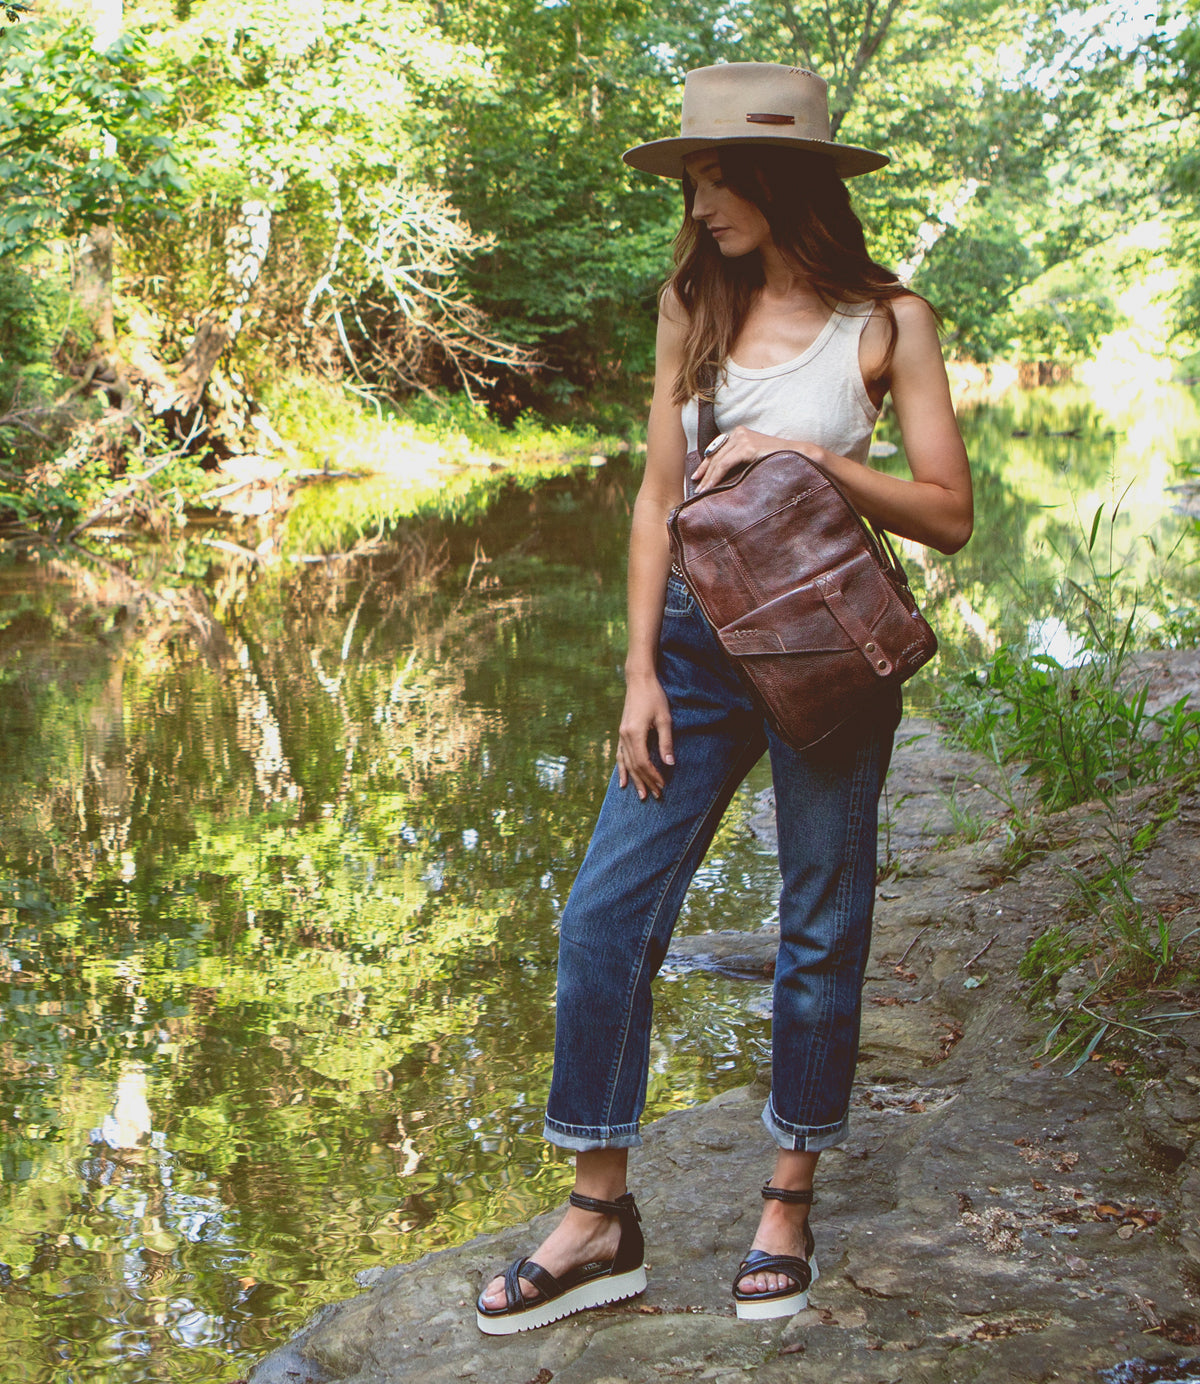 A woman wearing a Boss hat and jeans standing next to a river.